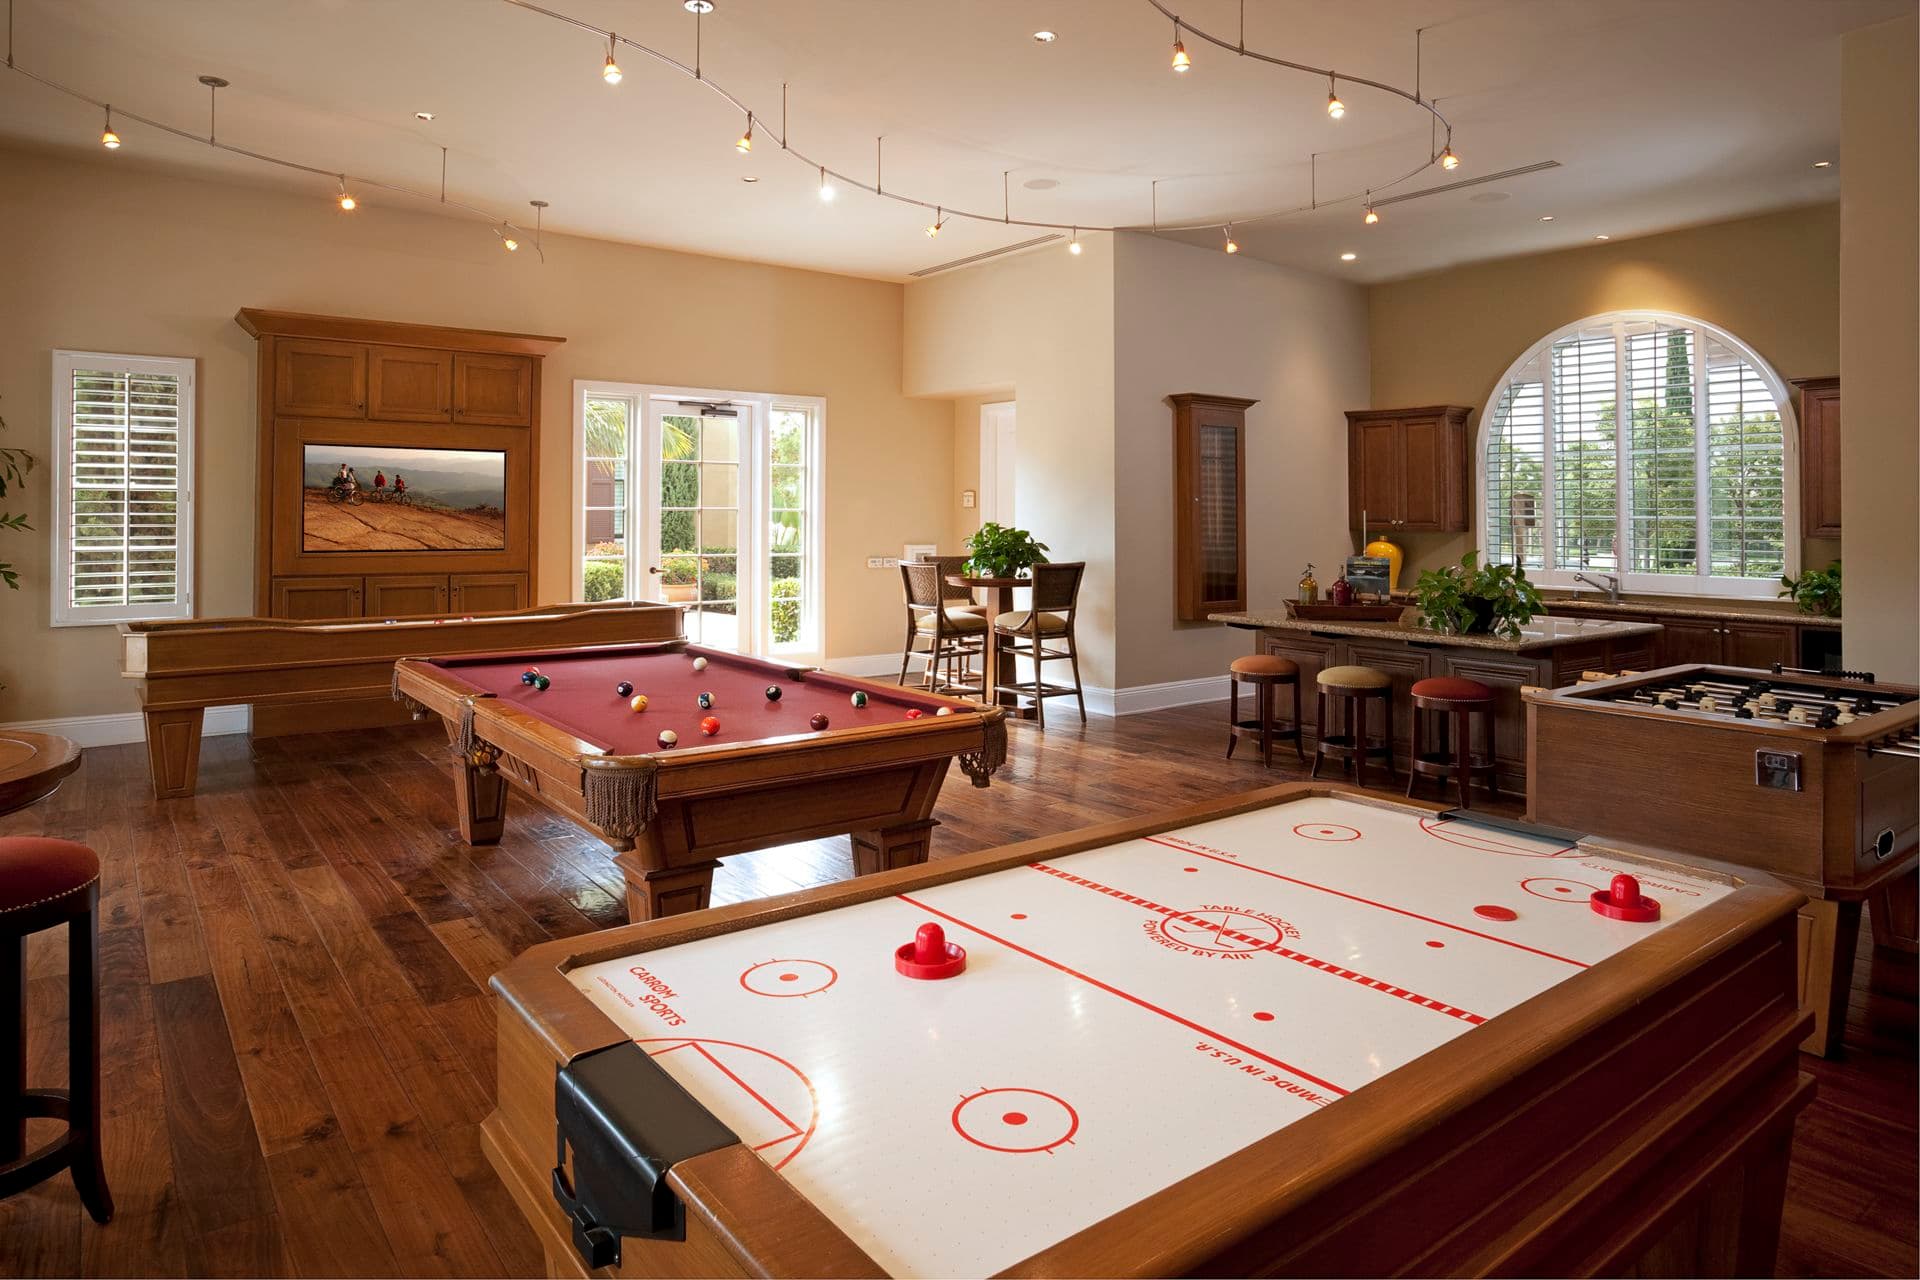 Interior view of game room at Woodbury Square Apartment Homes in Irvine, CA.